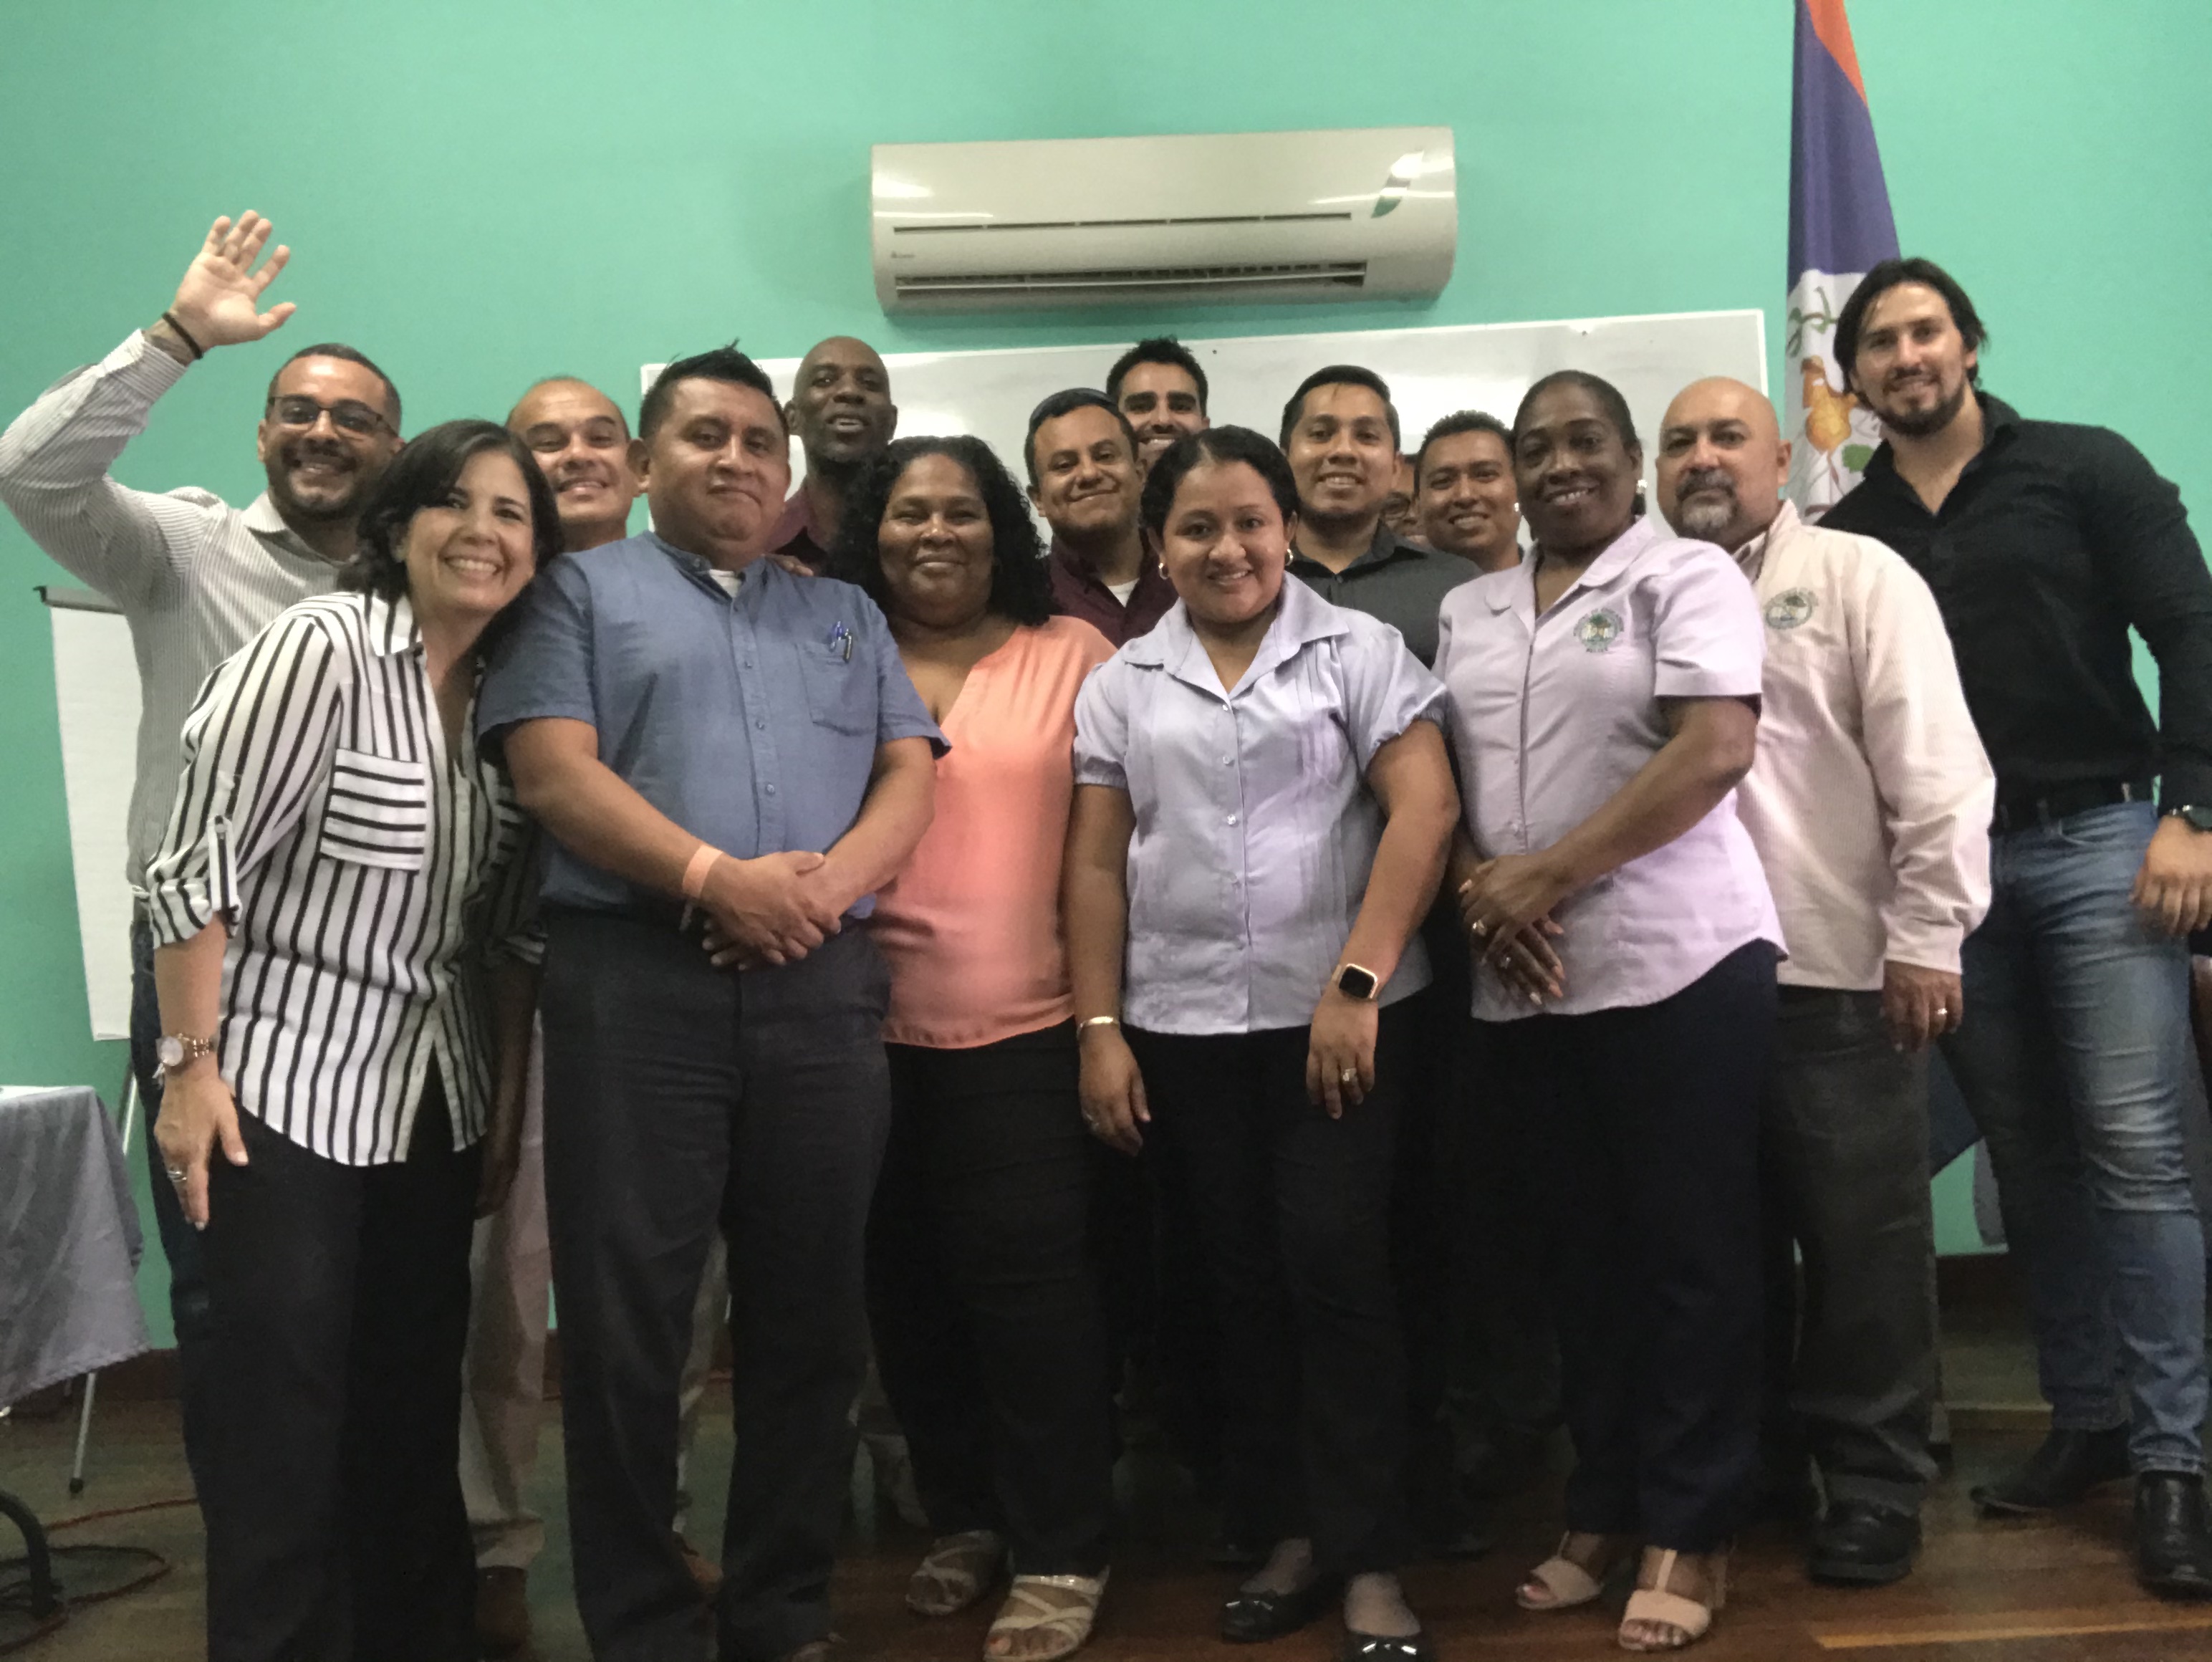 ProFuturo Program Officially Launched in Belize(October 15, 2019)